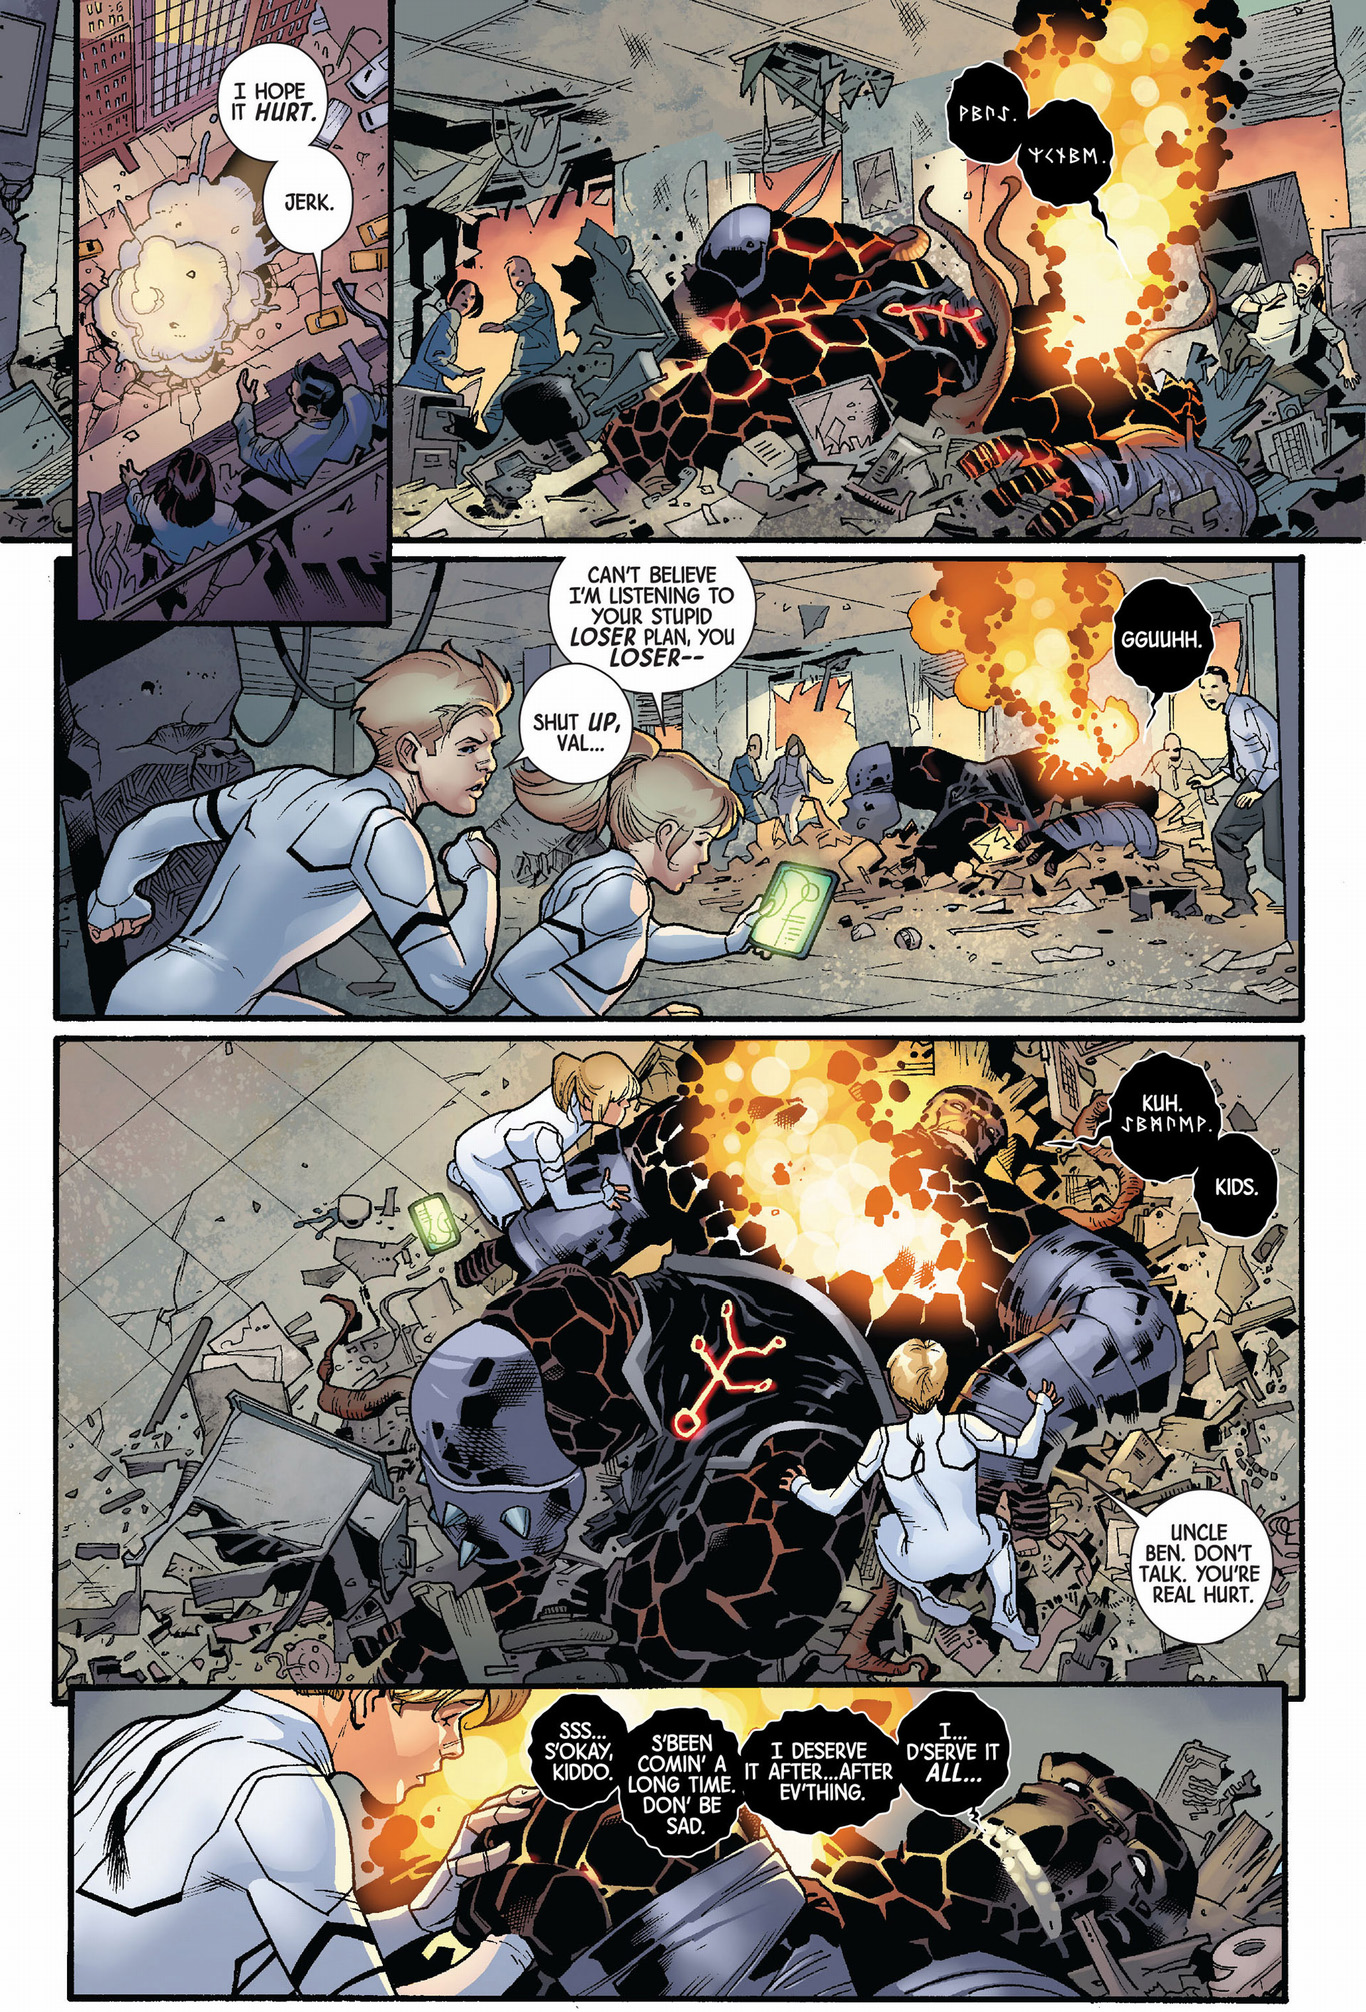 franklin richards saves the thing